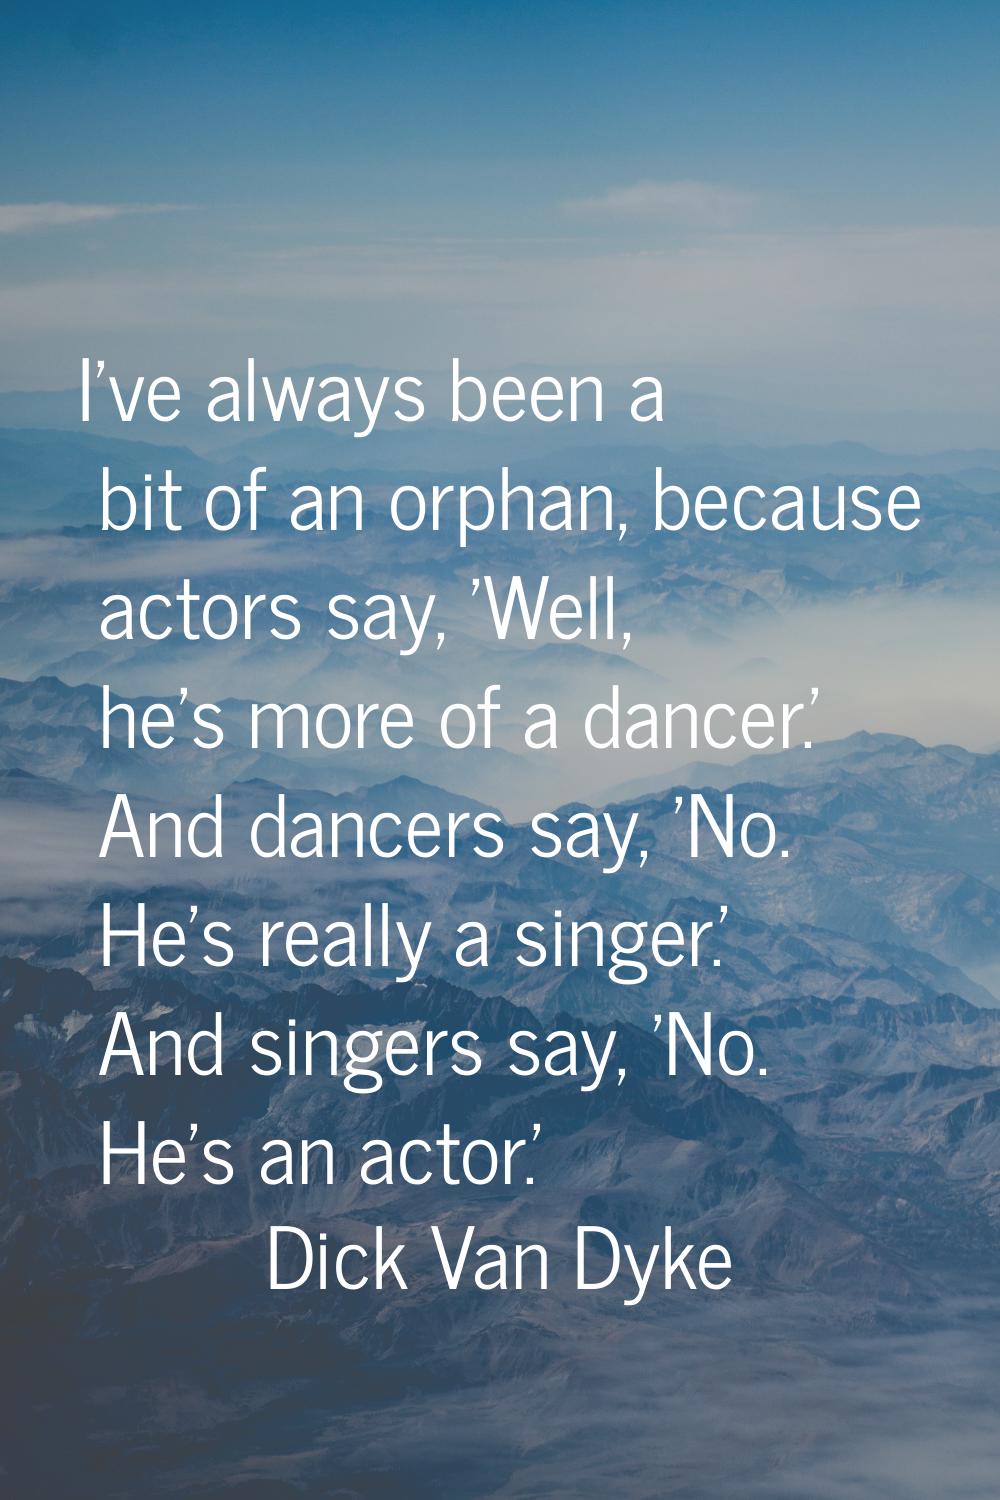 I've always been a bit of an orphan, because actors say, 'Well, he's more of a dancer.' And dancers